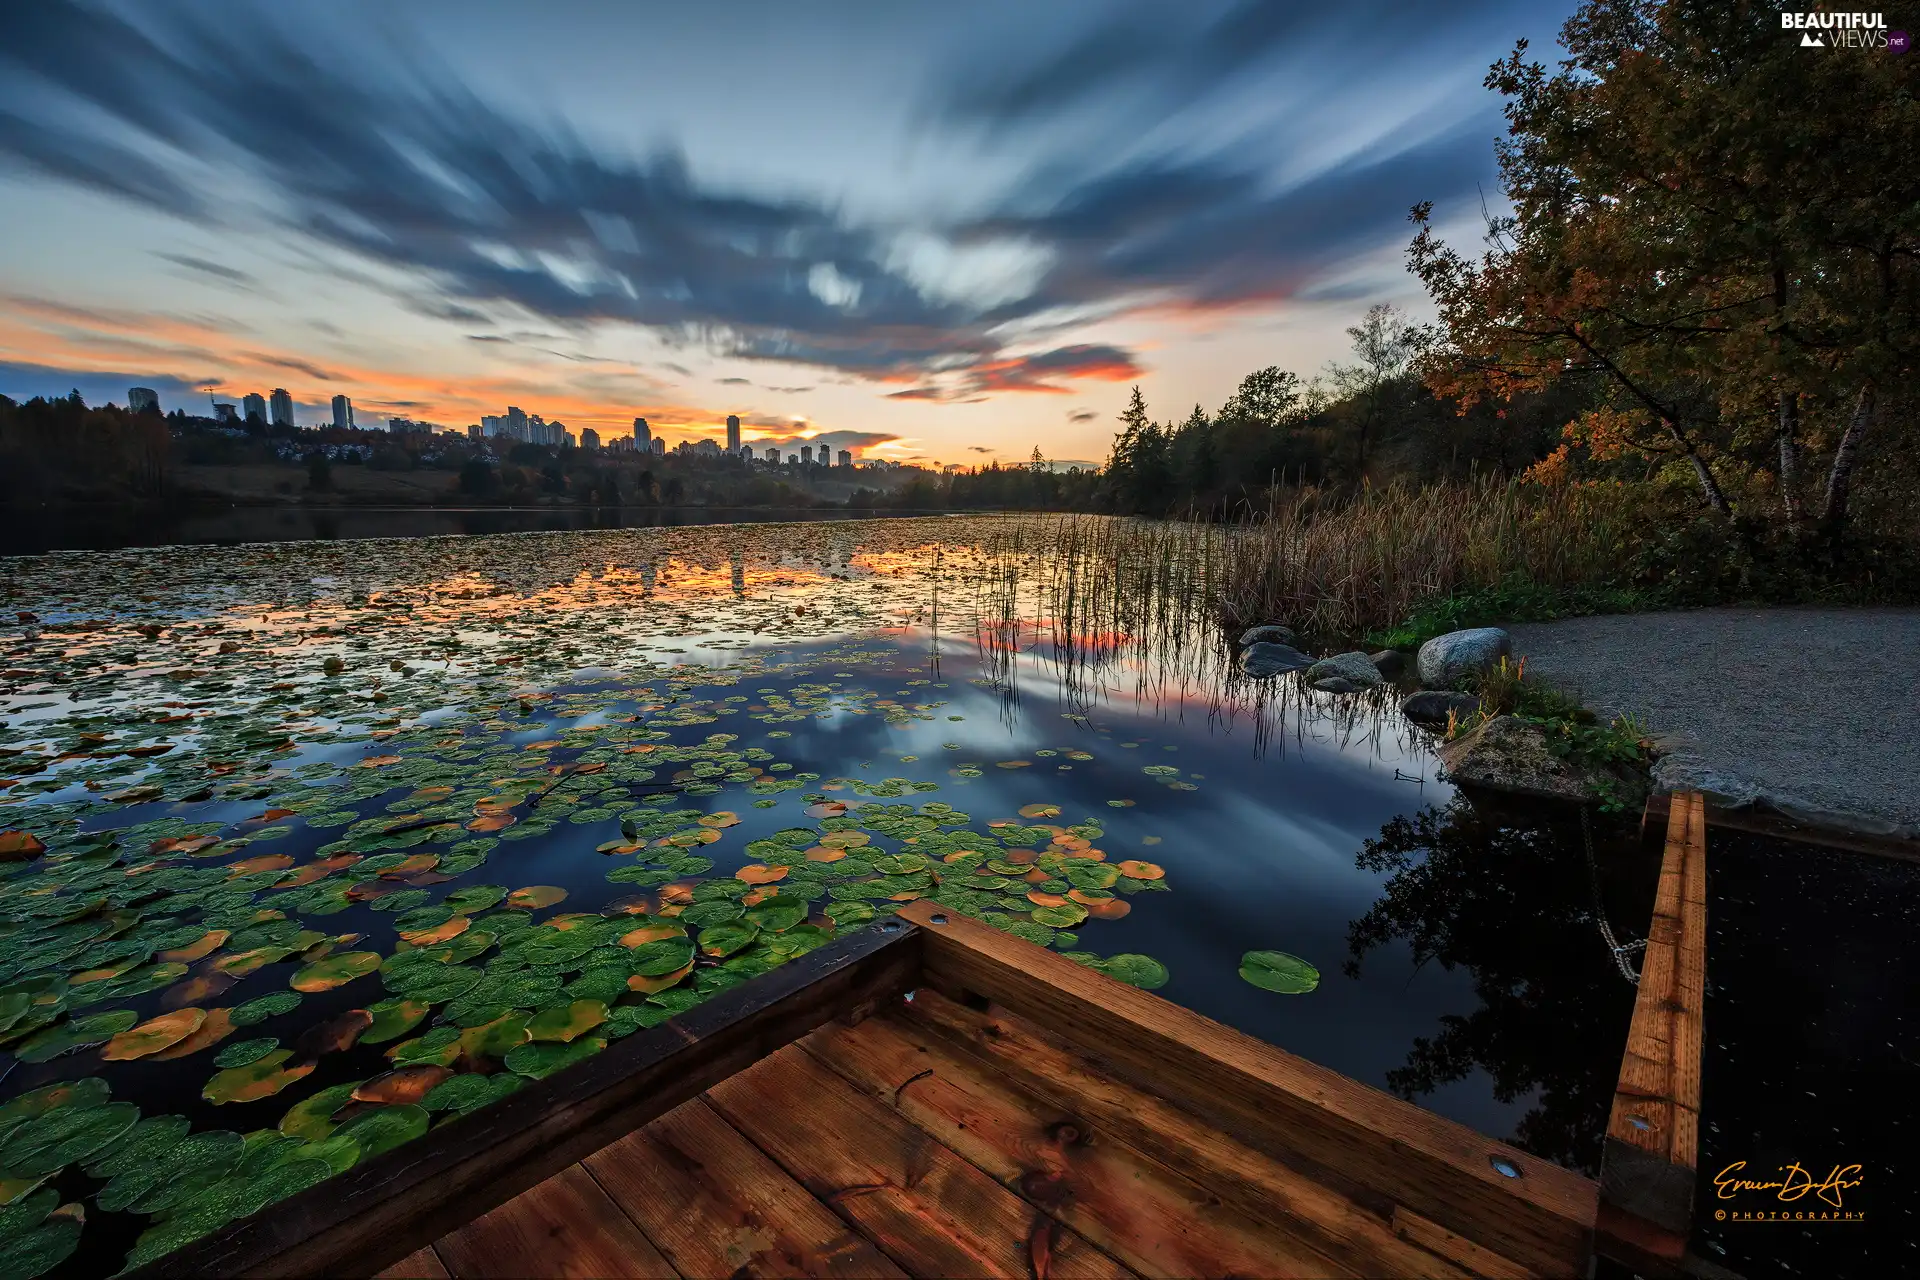 Water lilies, clouds, Pond - car, Leaf, Great Sunsets